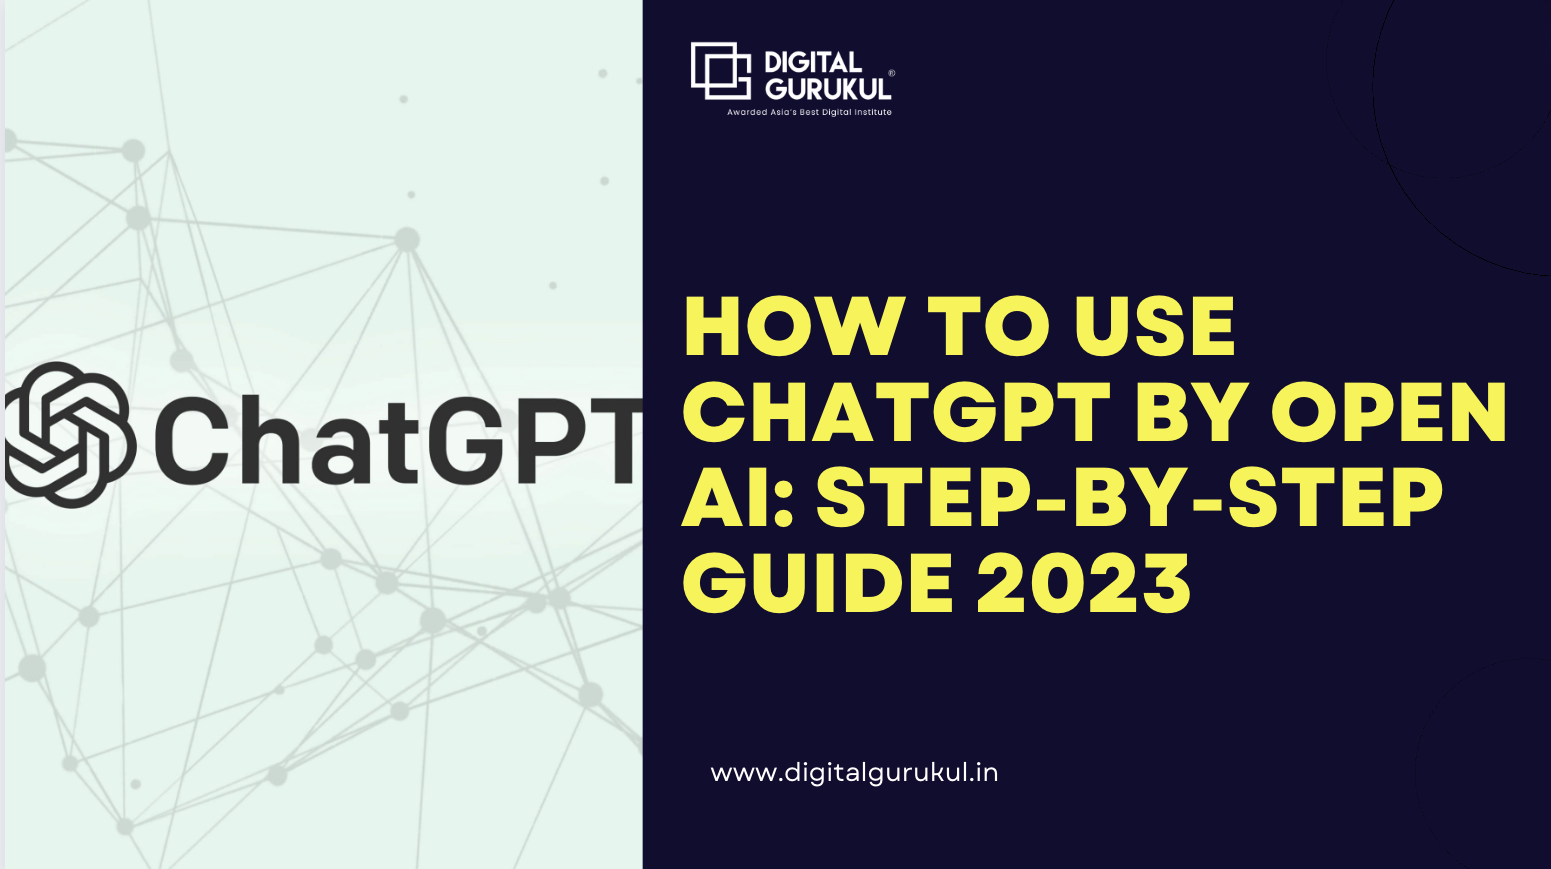 How to Use ChatGPT by Open AI: Step-by-Step Guide 2023